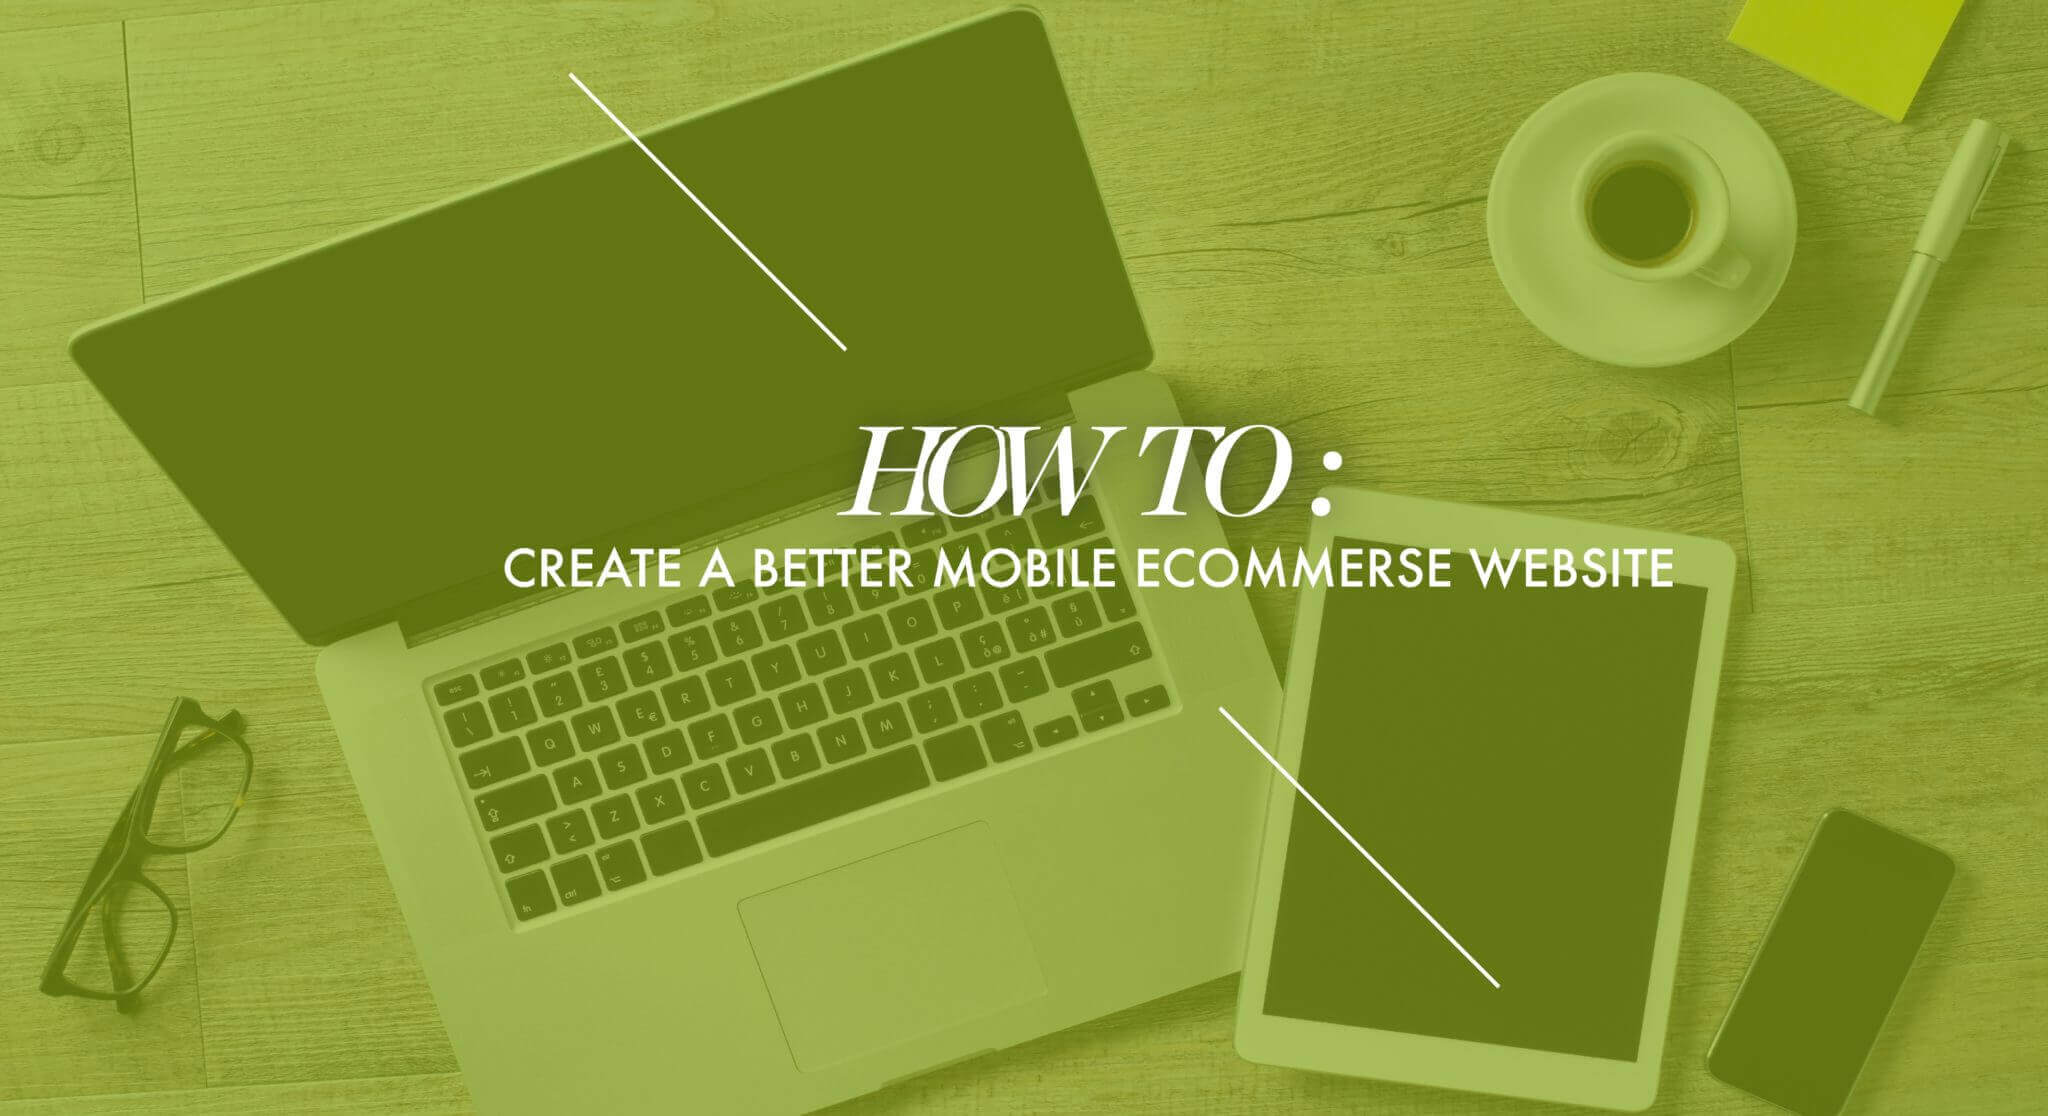 How to Create a Better Mobile Ecommerce Website